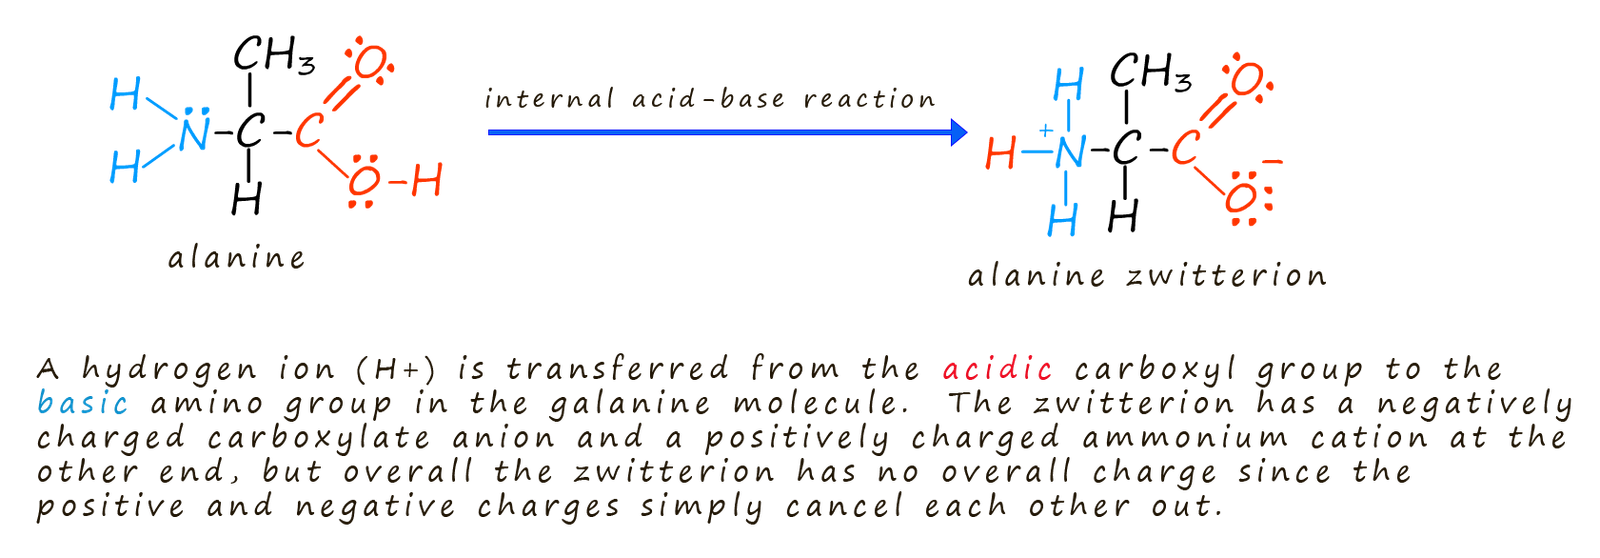 Formation of a zwitterion